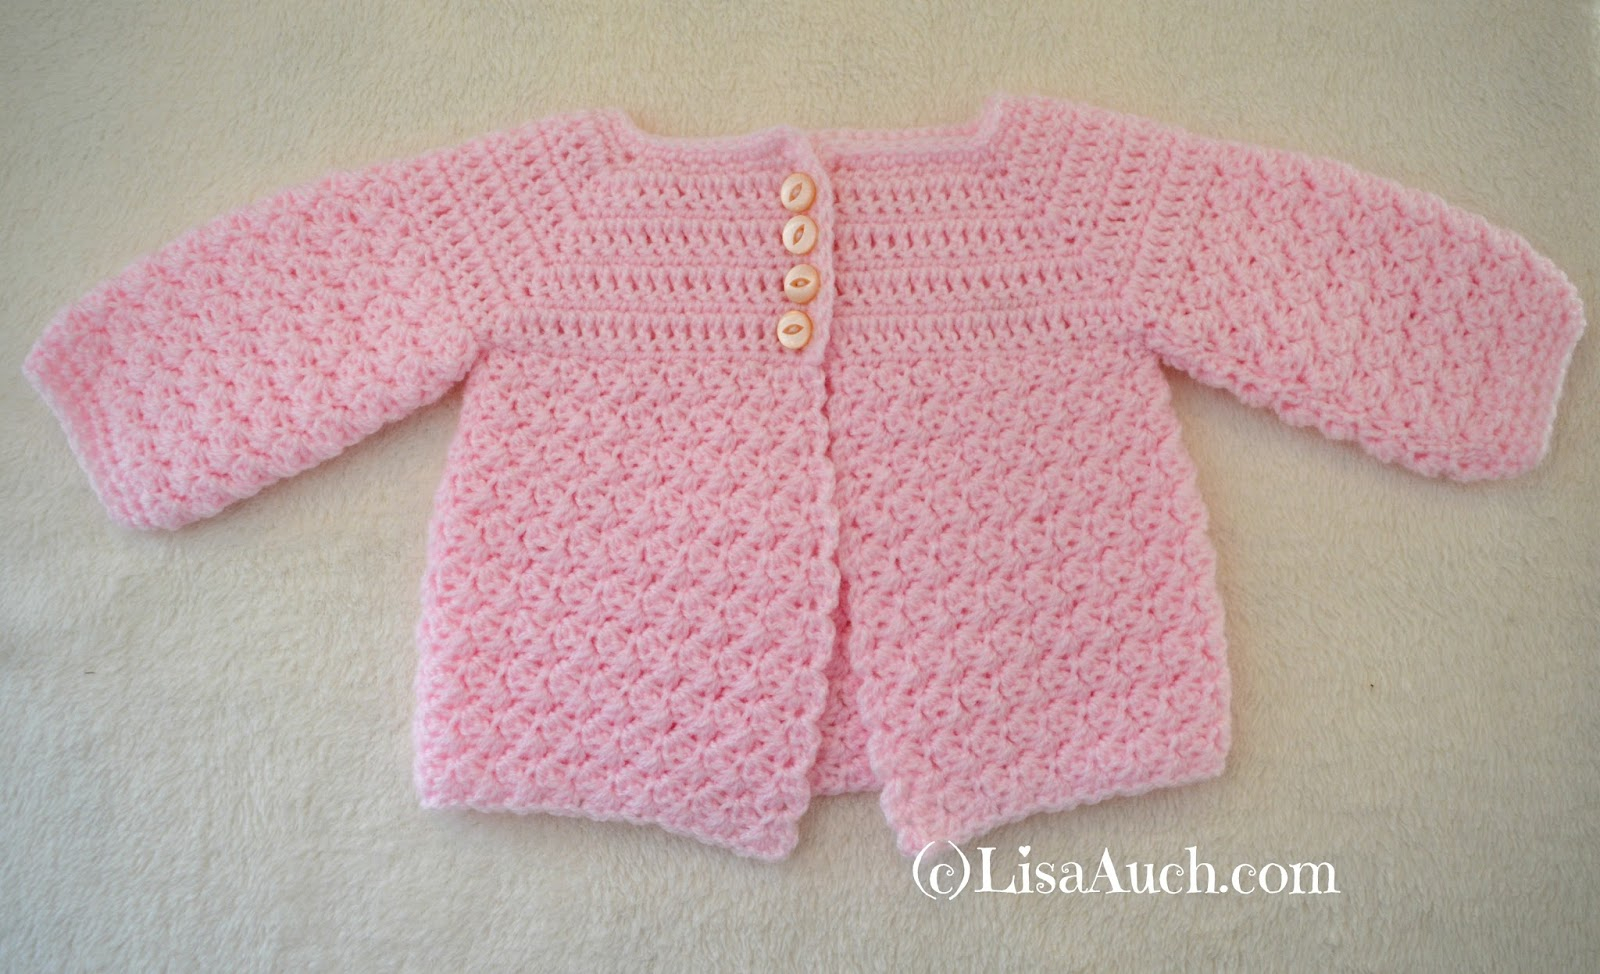 Free Crochet Baby Patterns Free Crochet Patterns And Designs Lisaauch Crochet Ba Cardigan